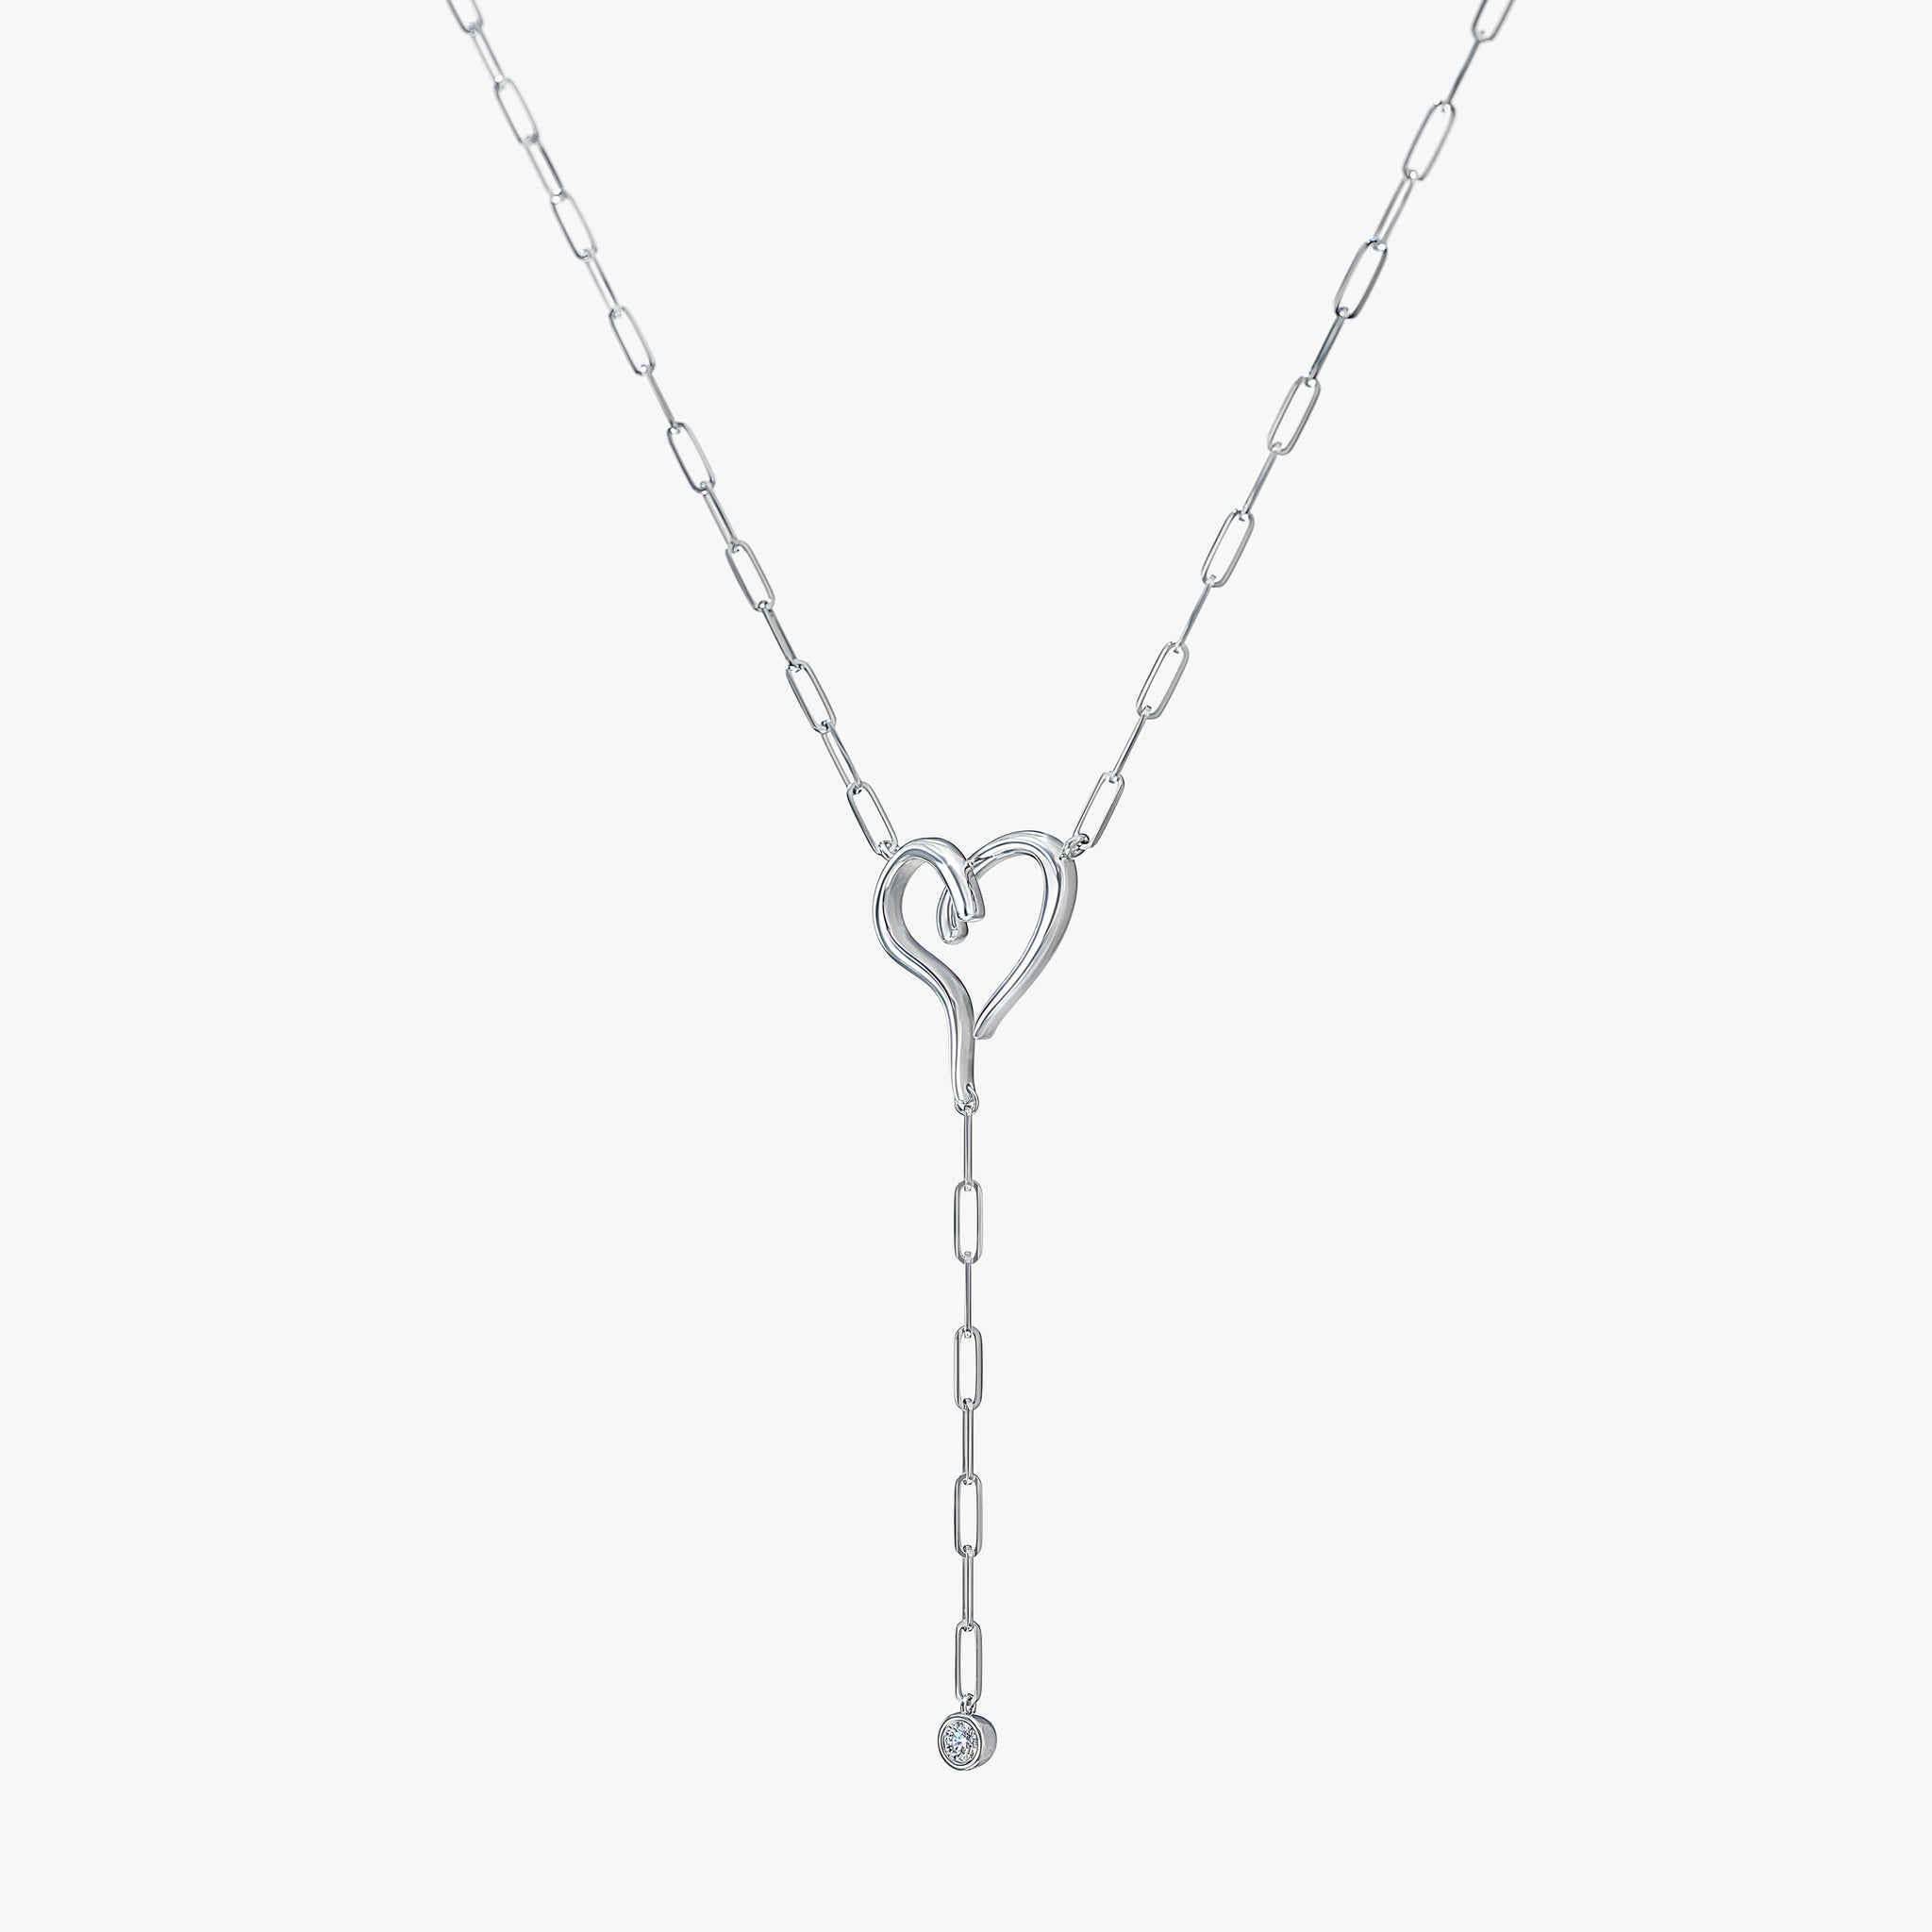 J'EVAR Sterling Silver Lariat Solitaire ALTR Lab Grown Diamond Necklace Perspective View